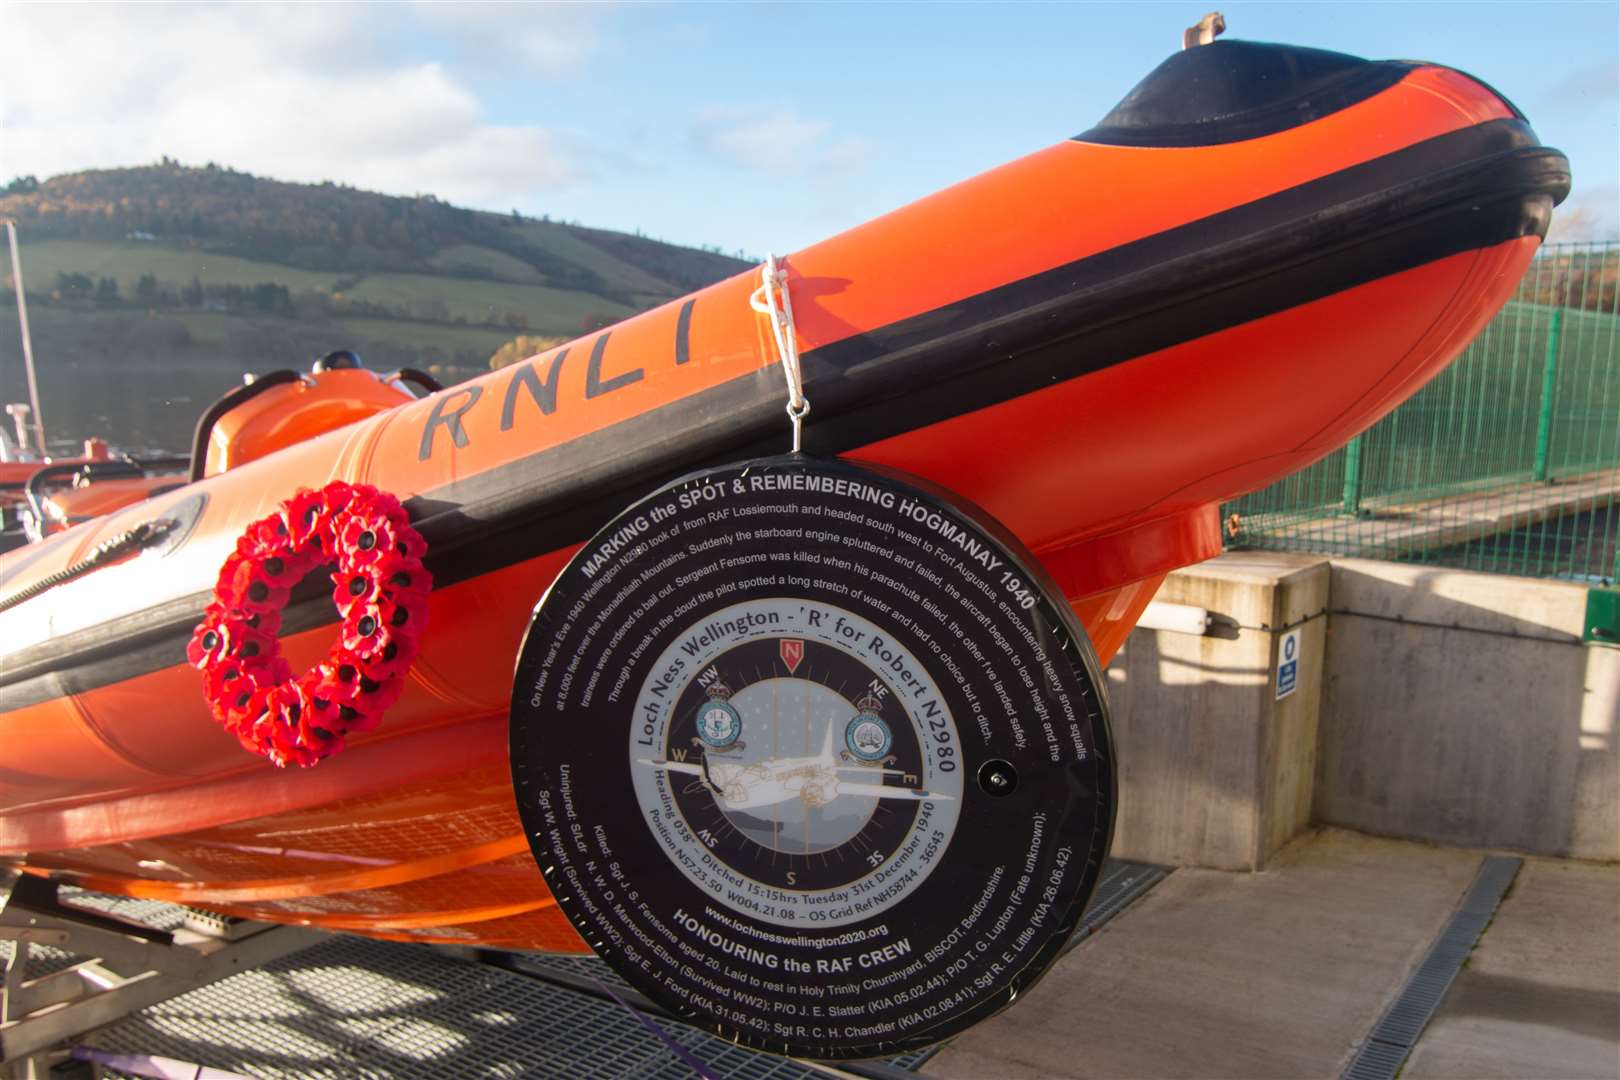 The wreath laid by Loch Ness RNLI. Picture by Joanna Stebbings.